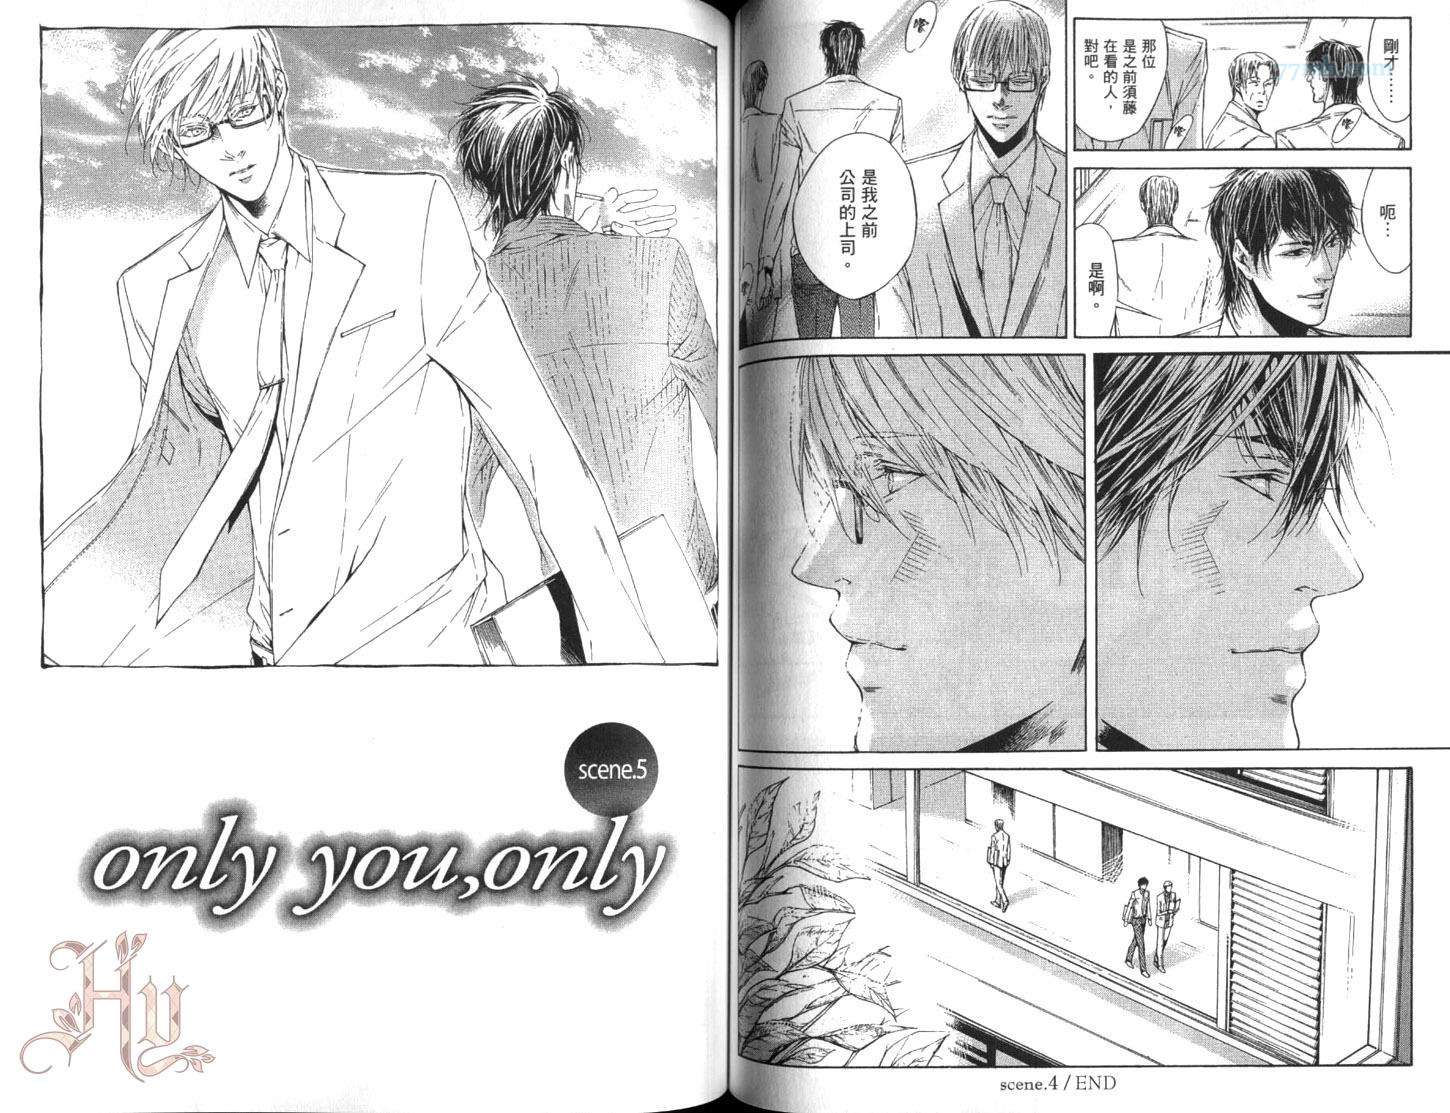 only you，only - 第1卷(2/3) - 4